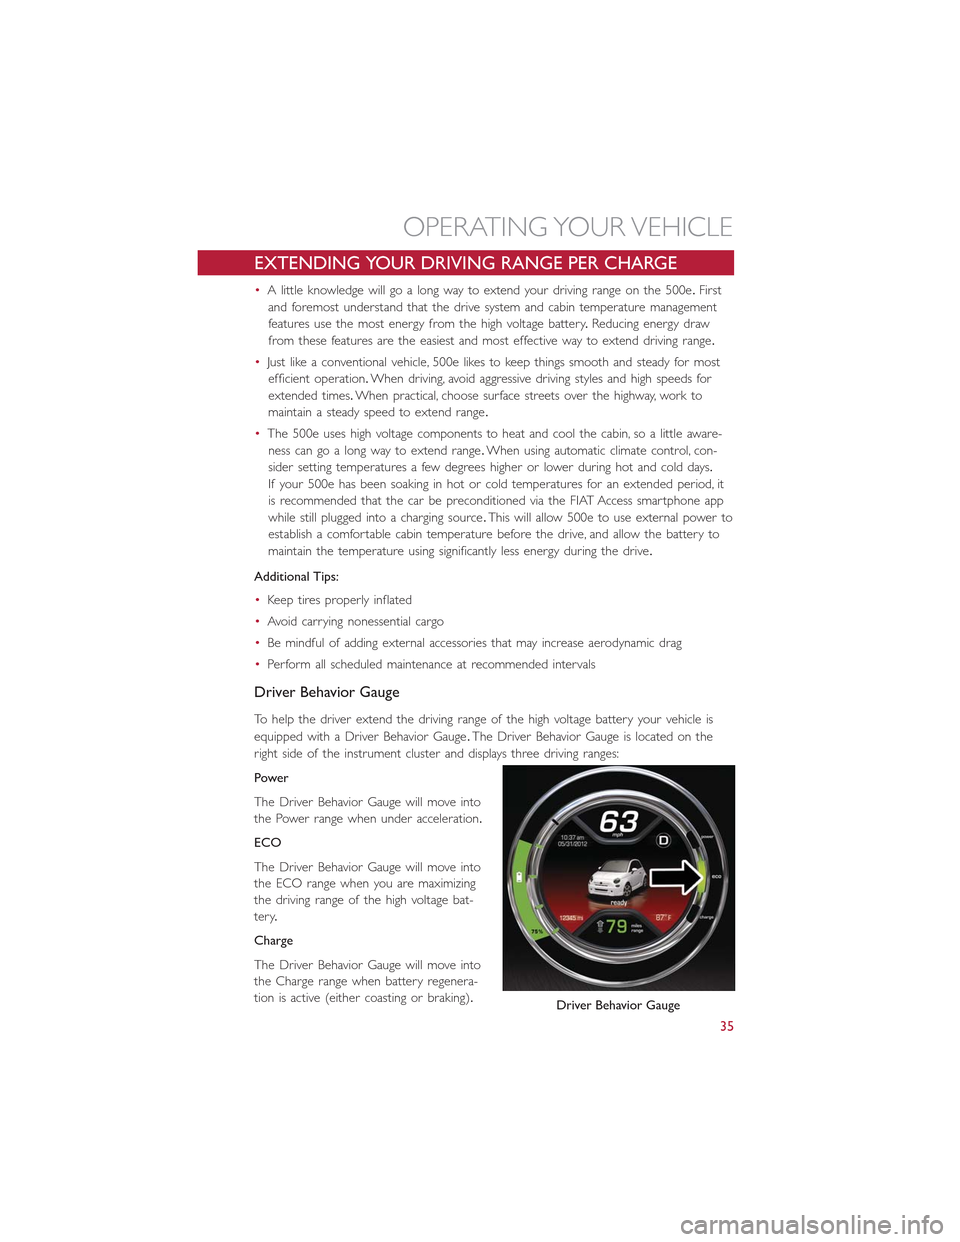 FIAT 500E 2015 2.G User Guide EXTENDING YOUR DRIVING RANGE PER CHARGE
•A little knowledge will go a long way to extend your driving range on the 500e.First
and foremost understand that the drive system and cabin temperature mana